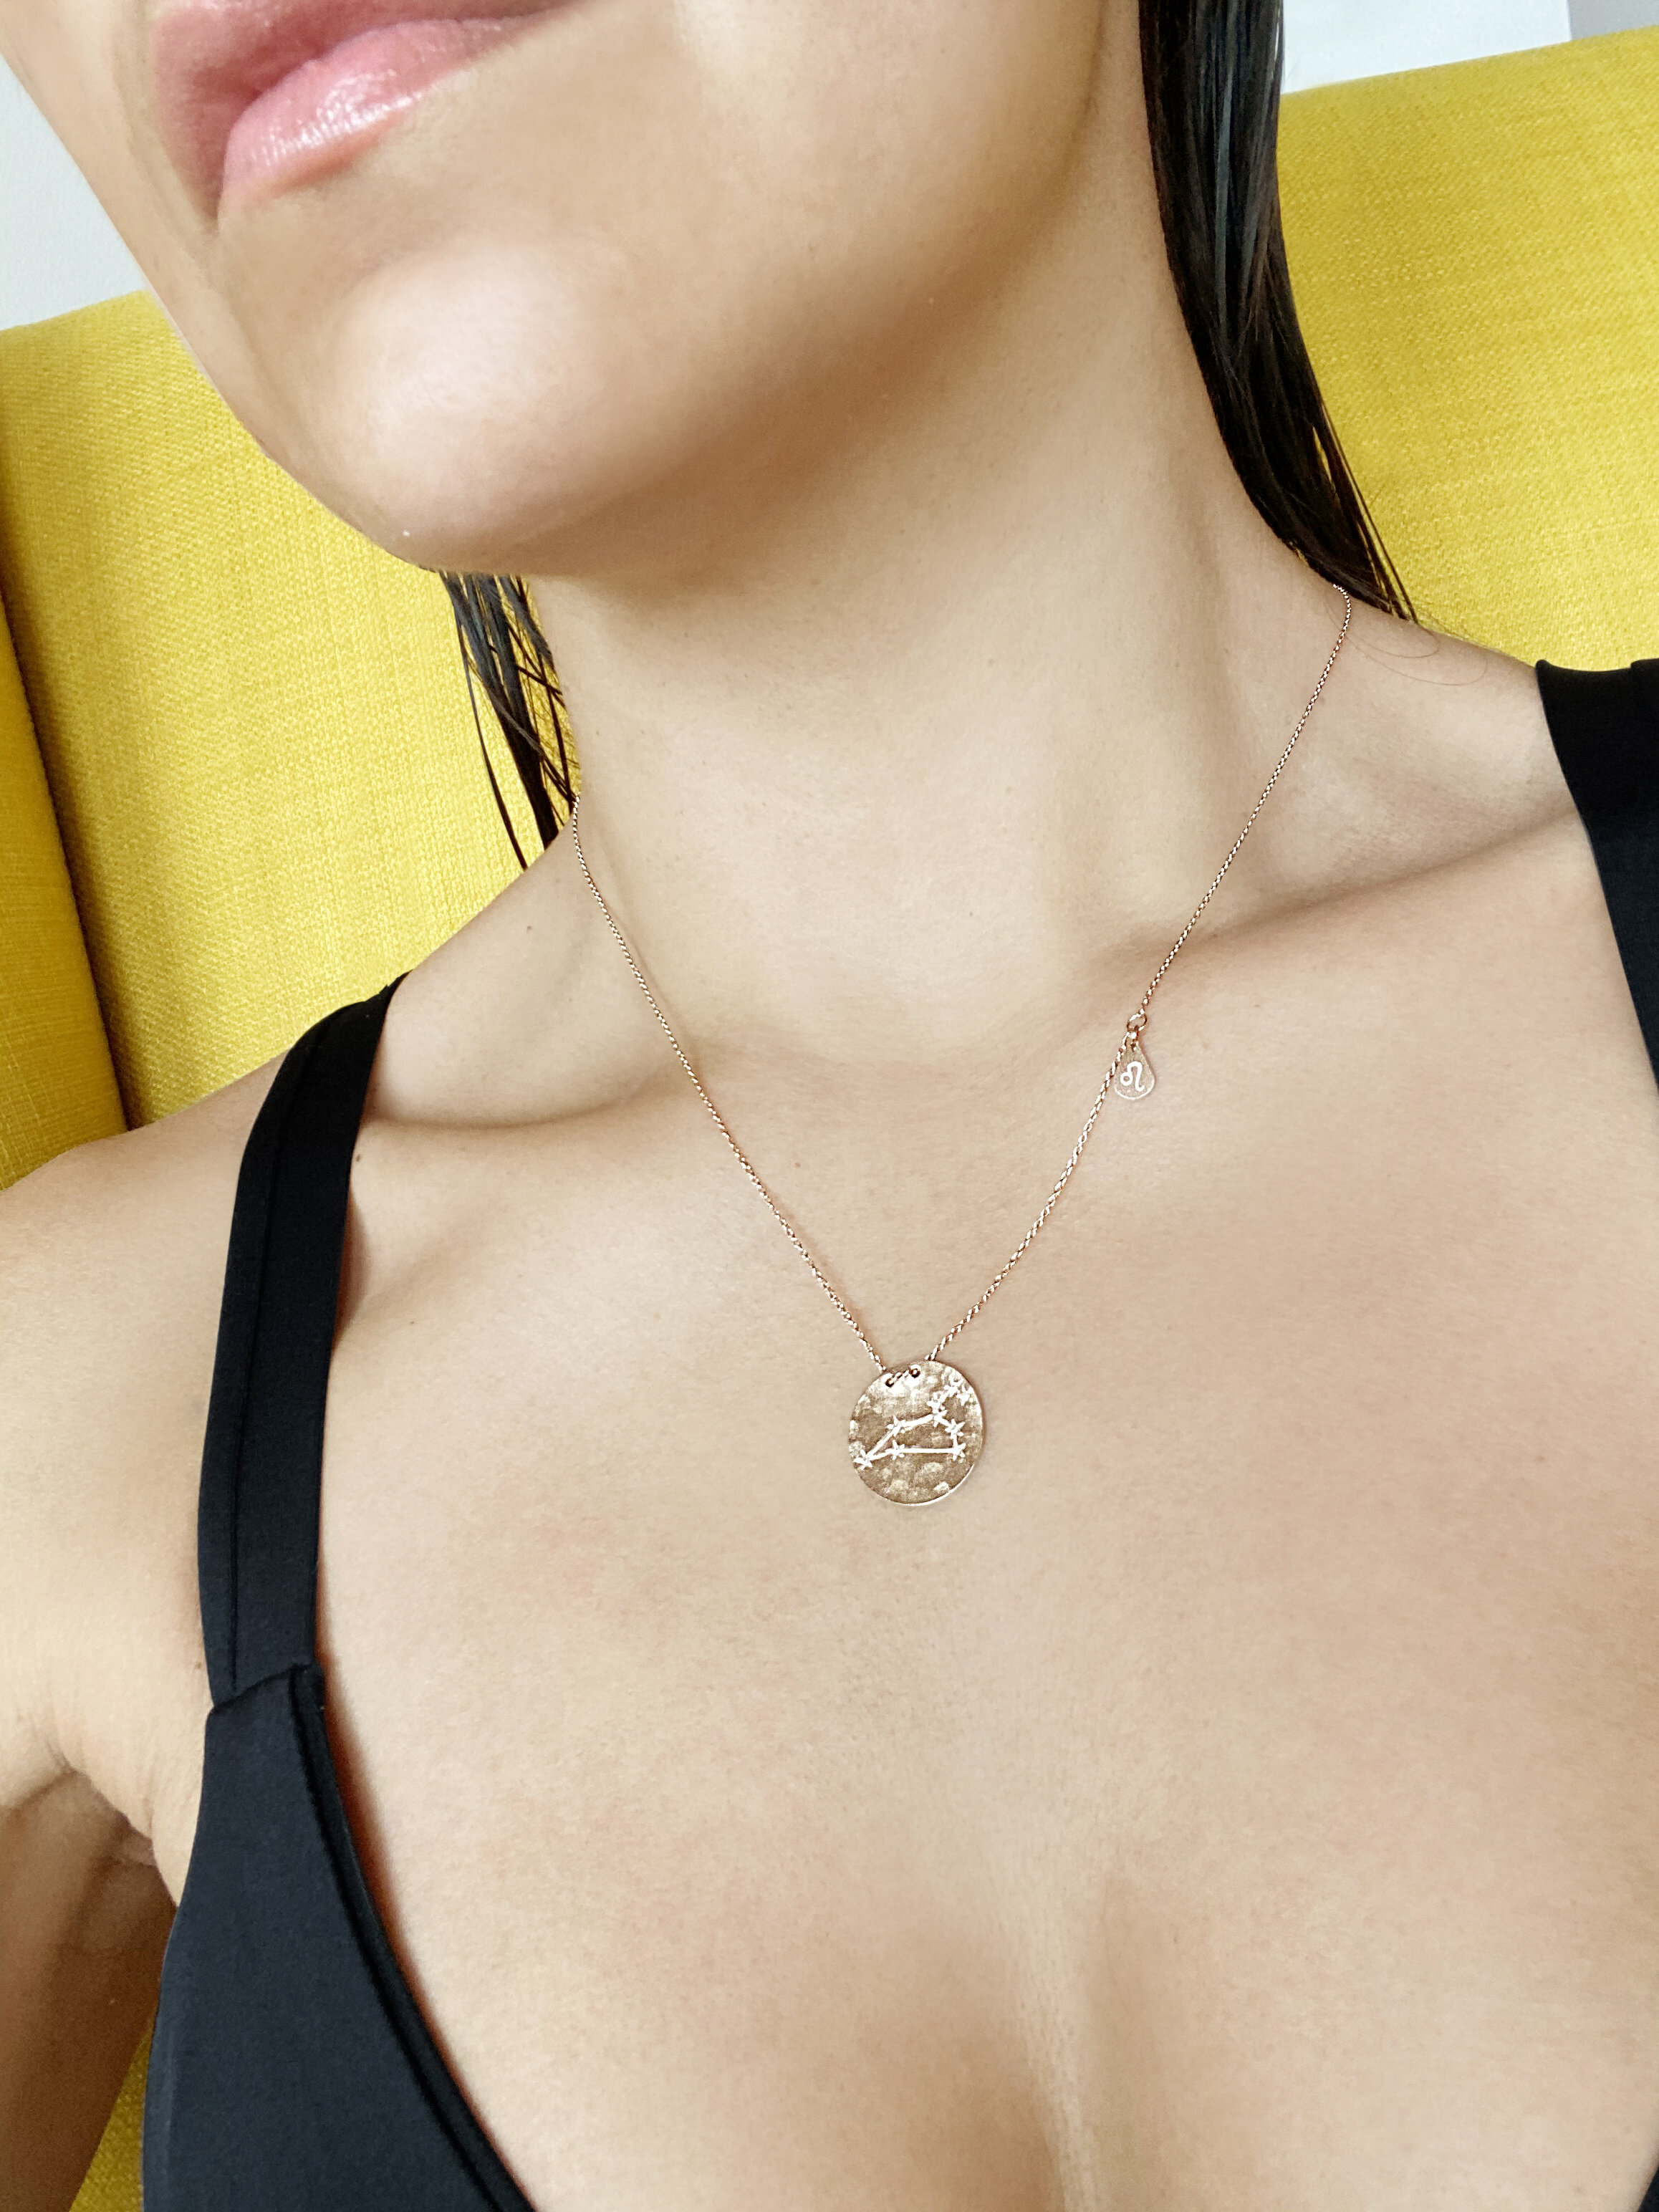 OWN Your Story 14K & Diamond Zodiac Astrological Constellation Pendant, $750